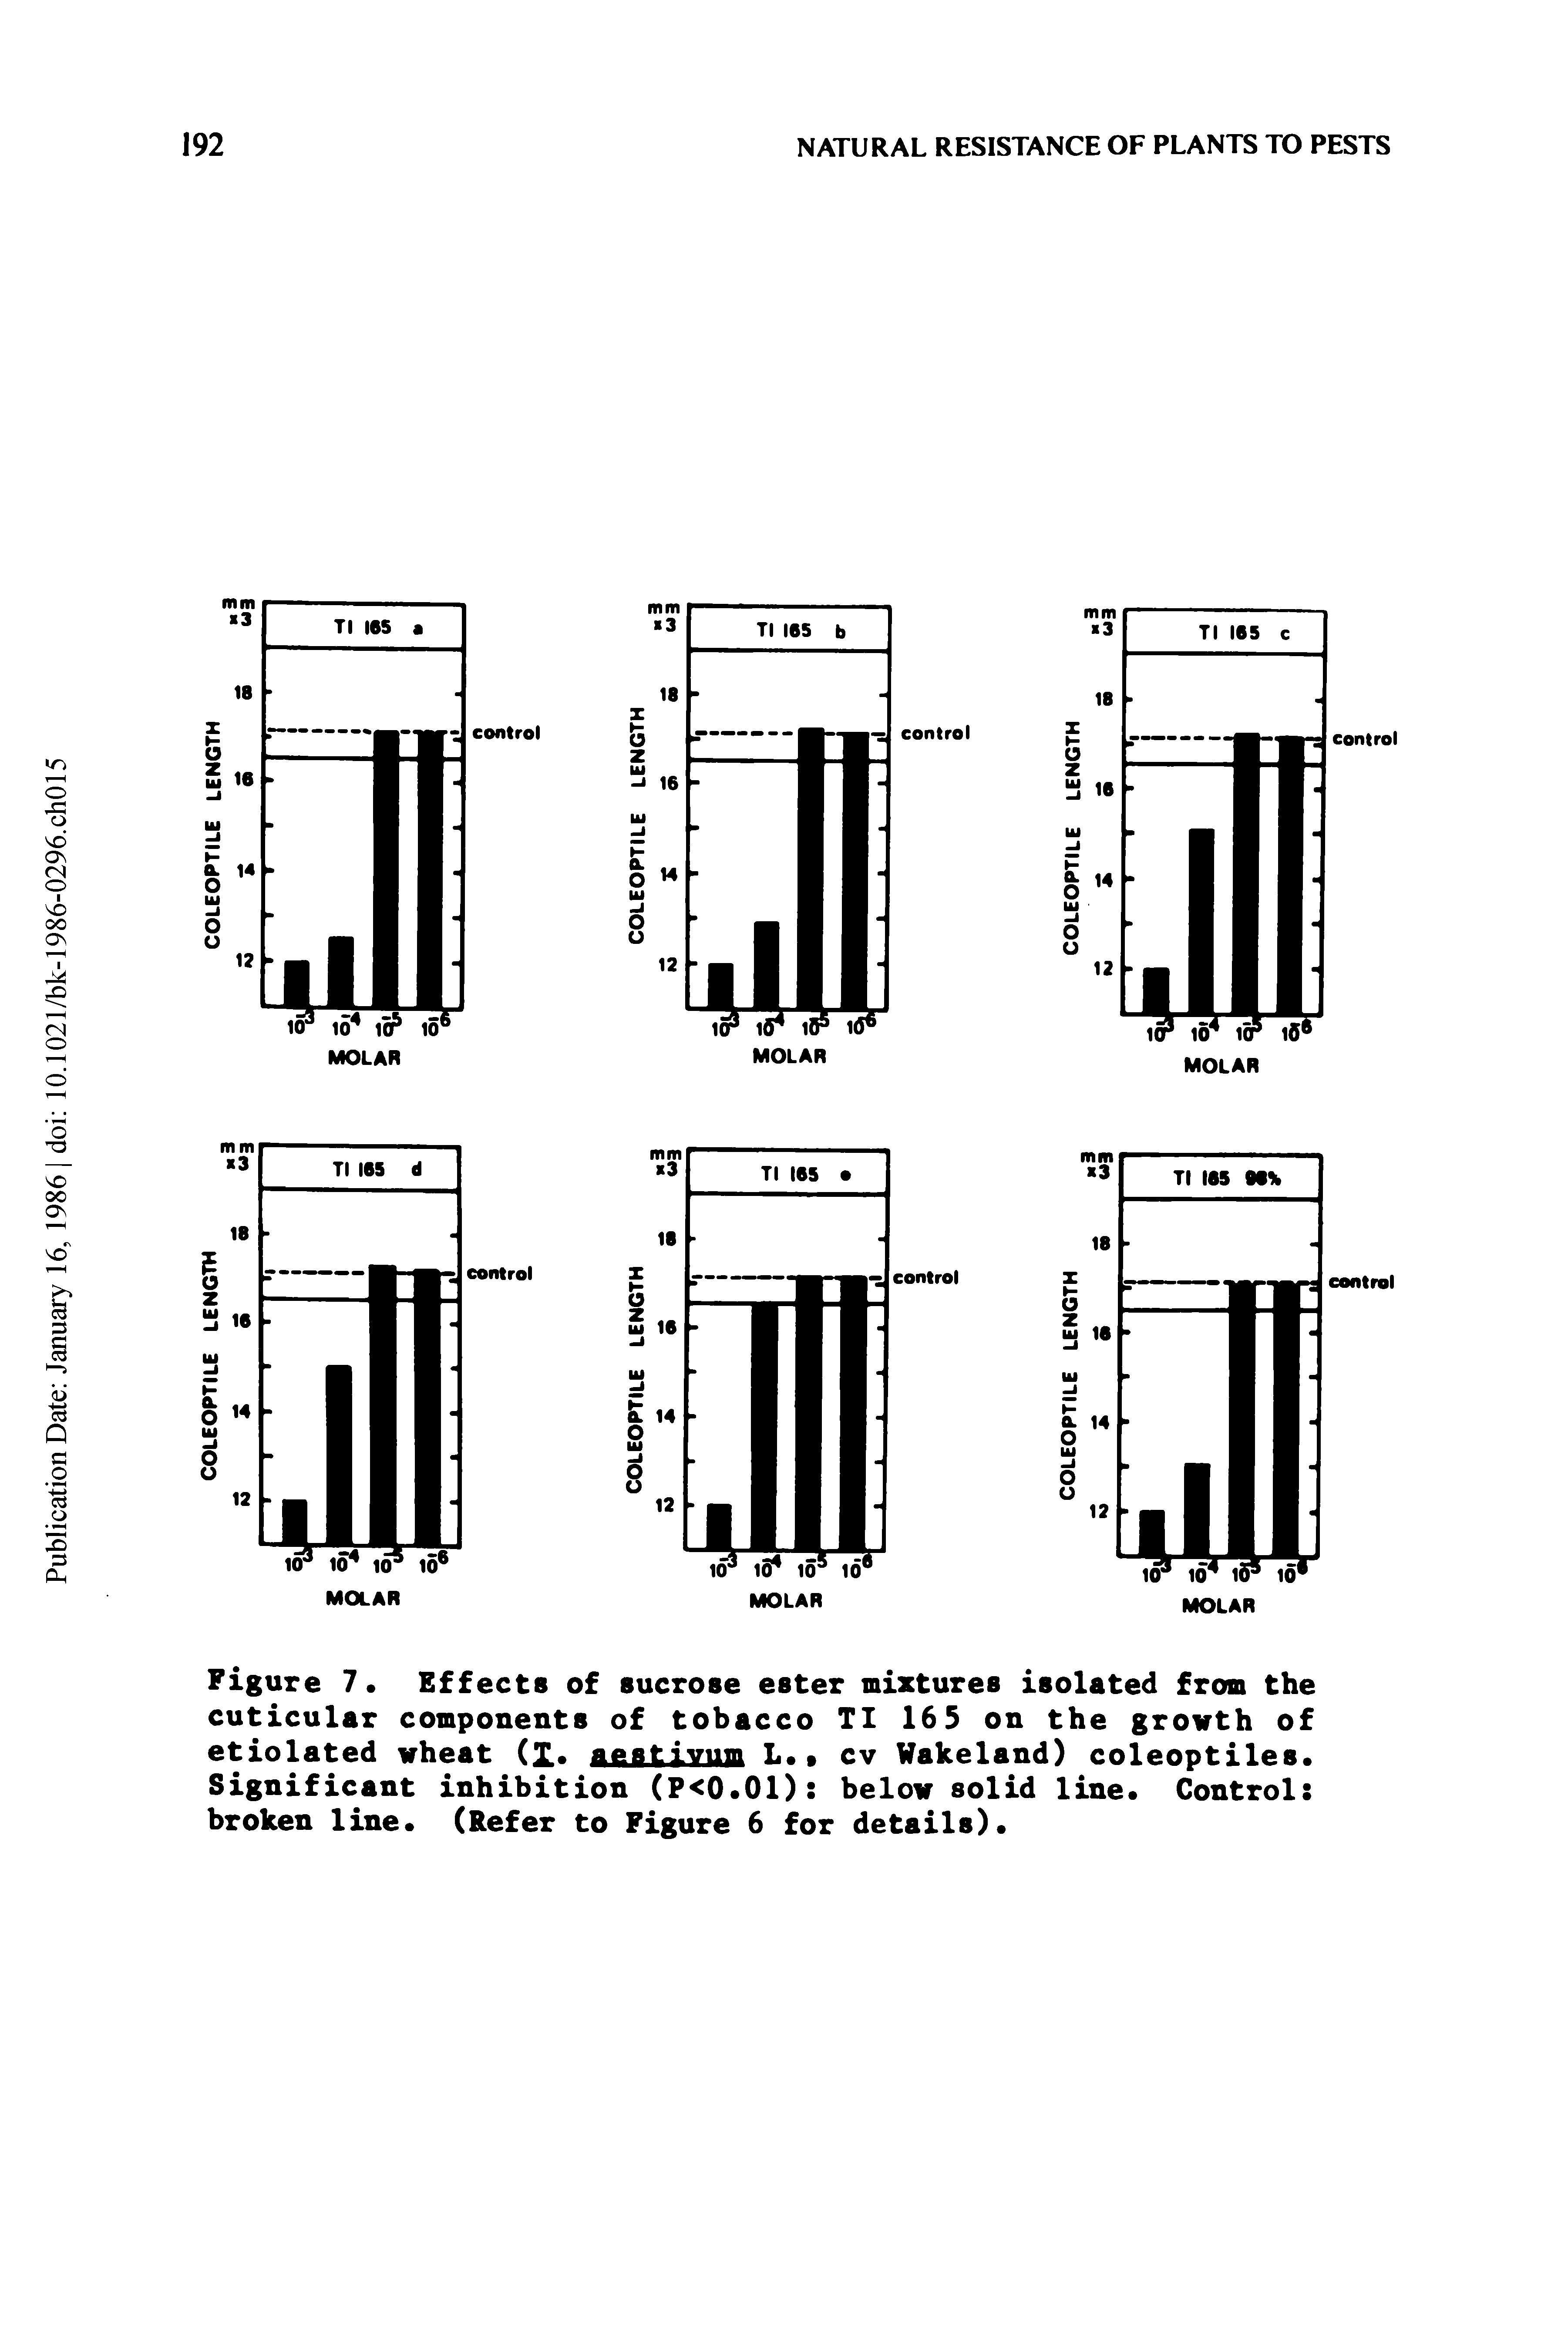 Figure 7. Effects of sucrose ester mixtures isolated from the cuticular components of tobacco TI 16 5 on the growth of etiolated wheat (X aestivum L. cv Vakeland) coleoptiles. Significant inhibition (P<0.01) below solid line. Control broken line. (Refer to Figure 6 for details).